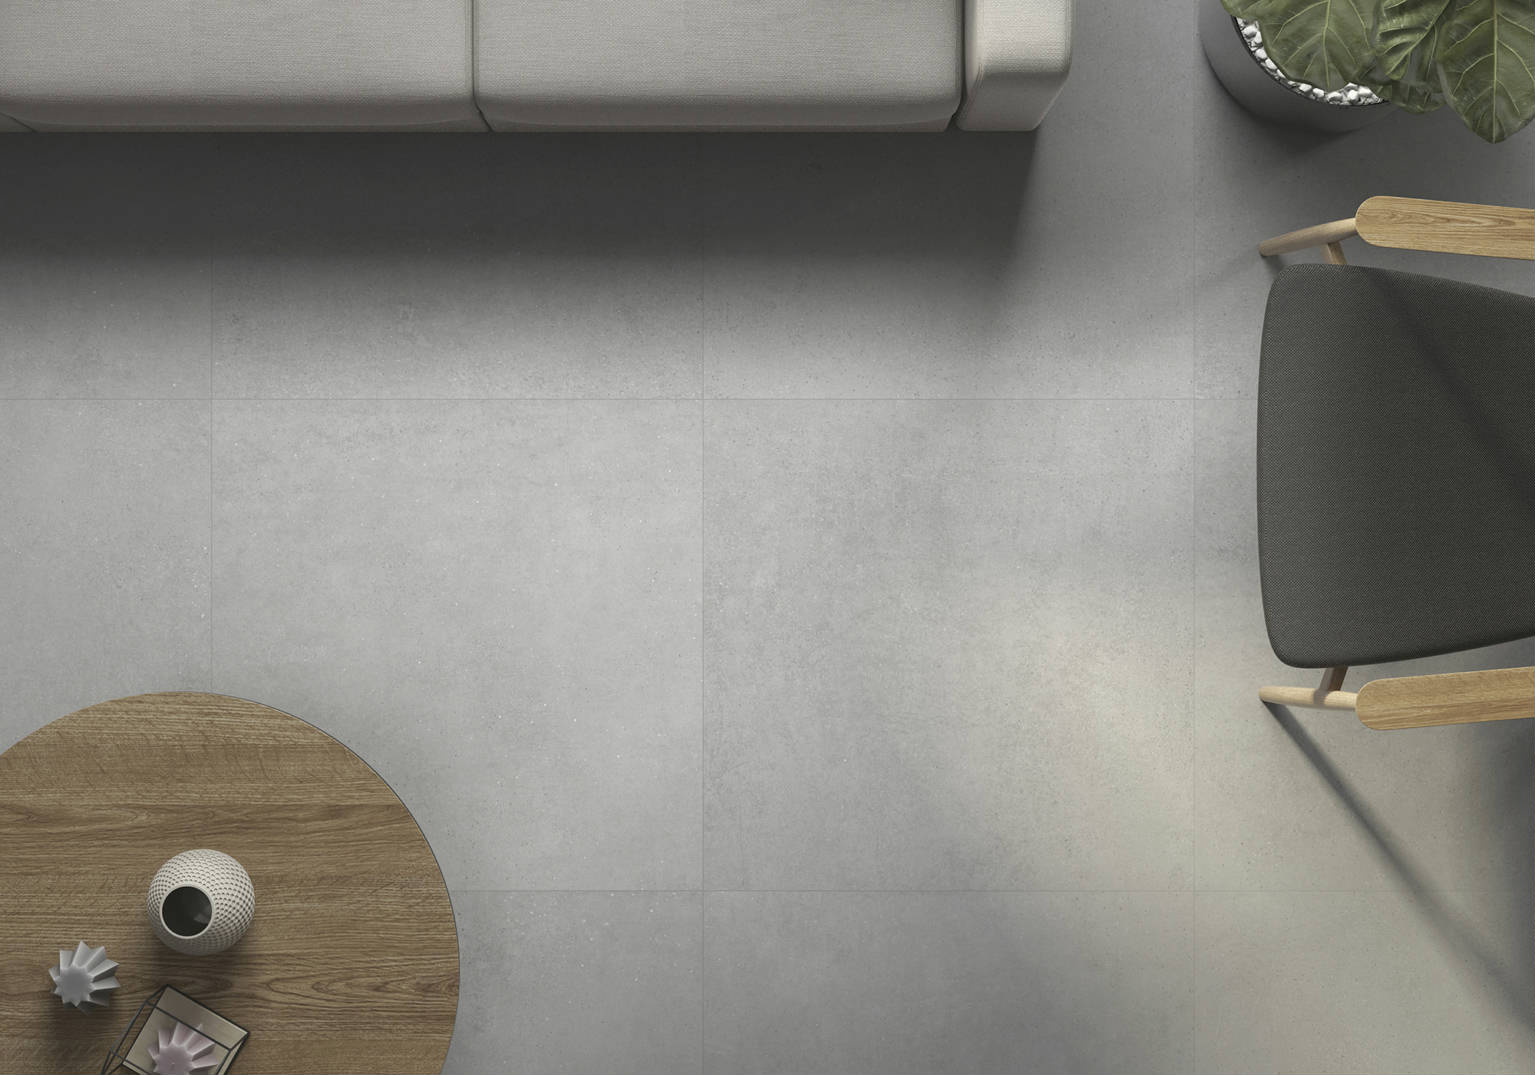 Ashland Grey 30X30  | Qualis Ceramica | Luxury Tile and Vinyl at affordable prices